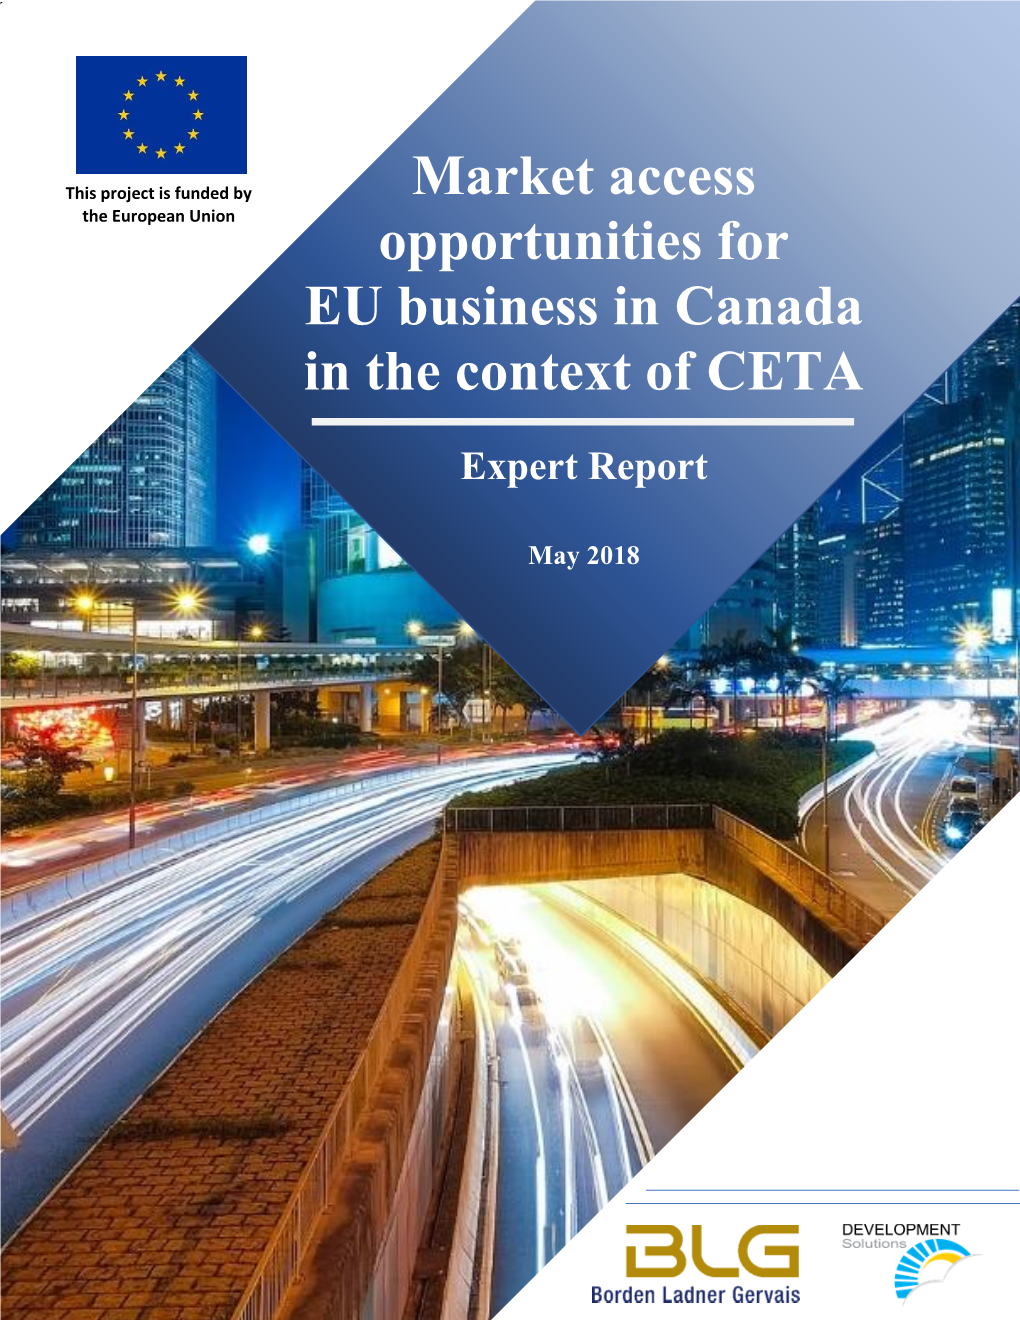 Market Access Opportunities for EU Business in Canada in the Context of CETA Expert Report